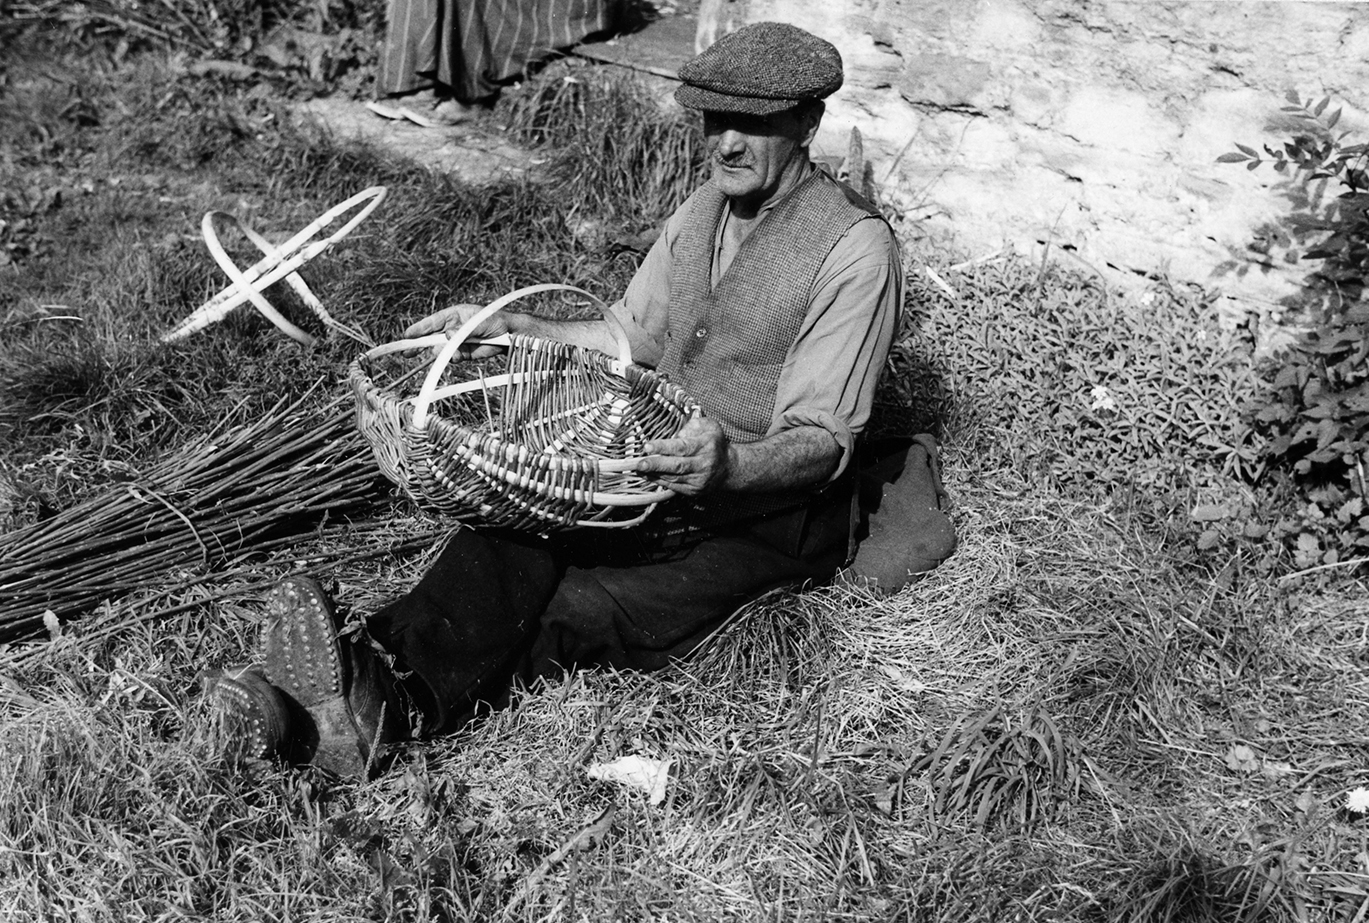 Tinker making a scull for potato gathering.1960 School of Scottish Studies, Kissling Archive